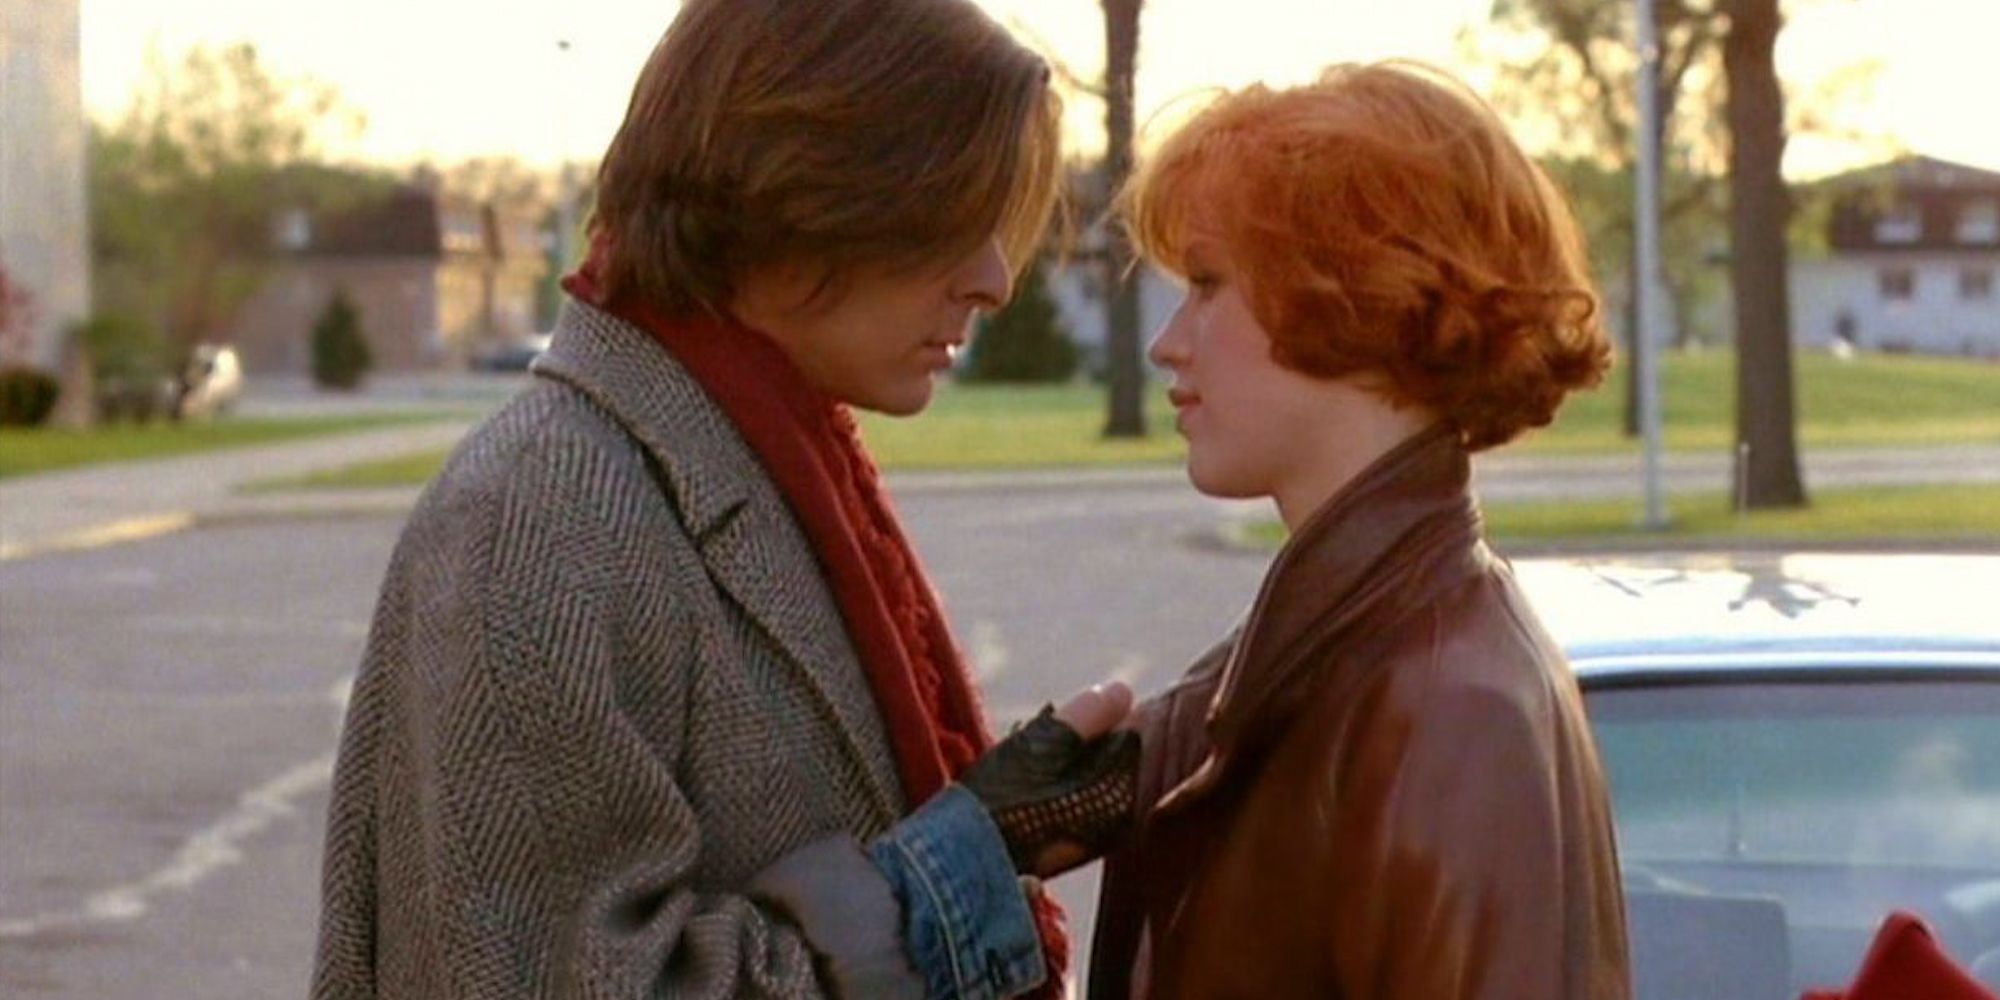 John (Judd Nelson) and Claire (Molly Ringwald) standing together in front of a car The Breakfast Club